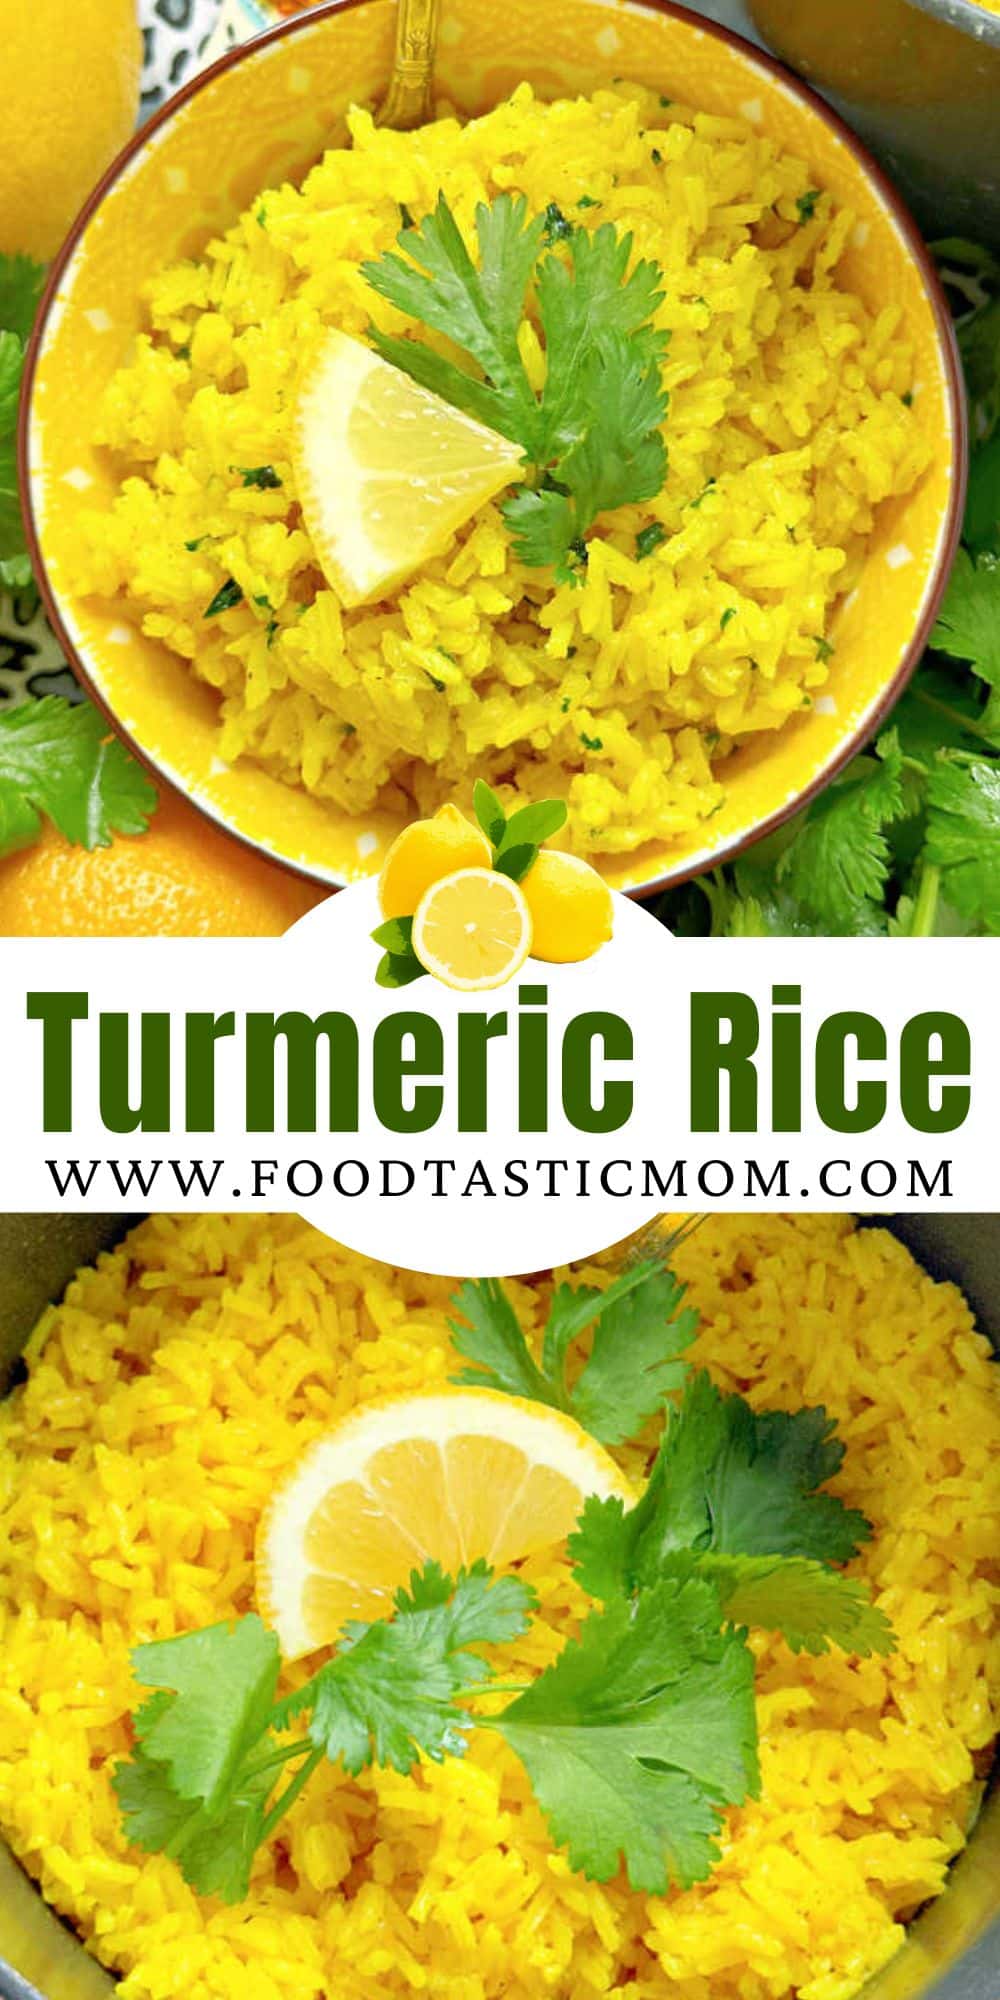 Turmeric Rice is an easy and colorful side dish. The rice is fragrant and delicious with turmeric, garlic, butter and fresh lemon juice. via @foodtasticmom